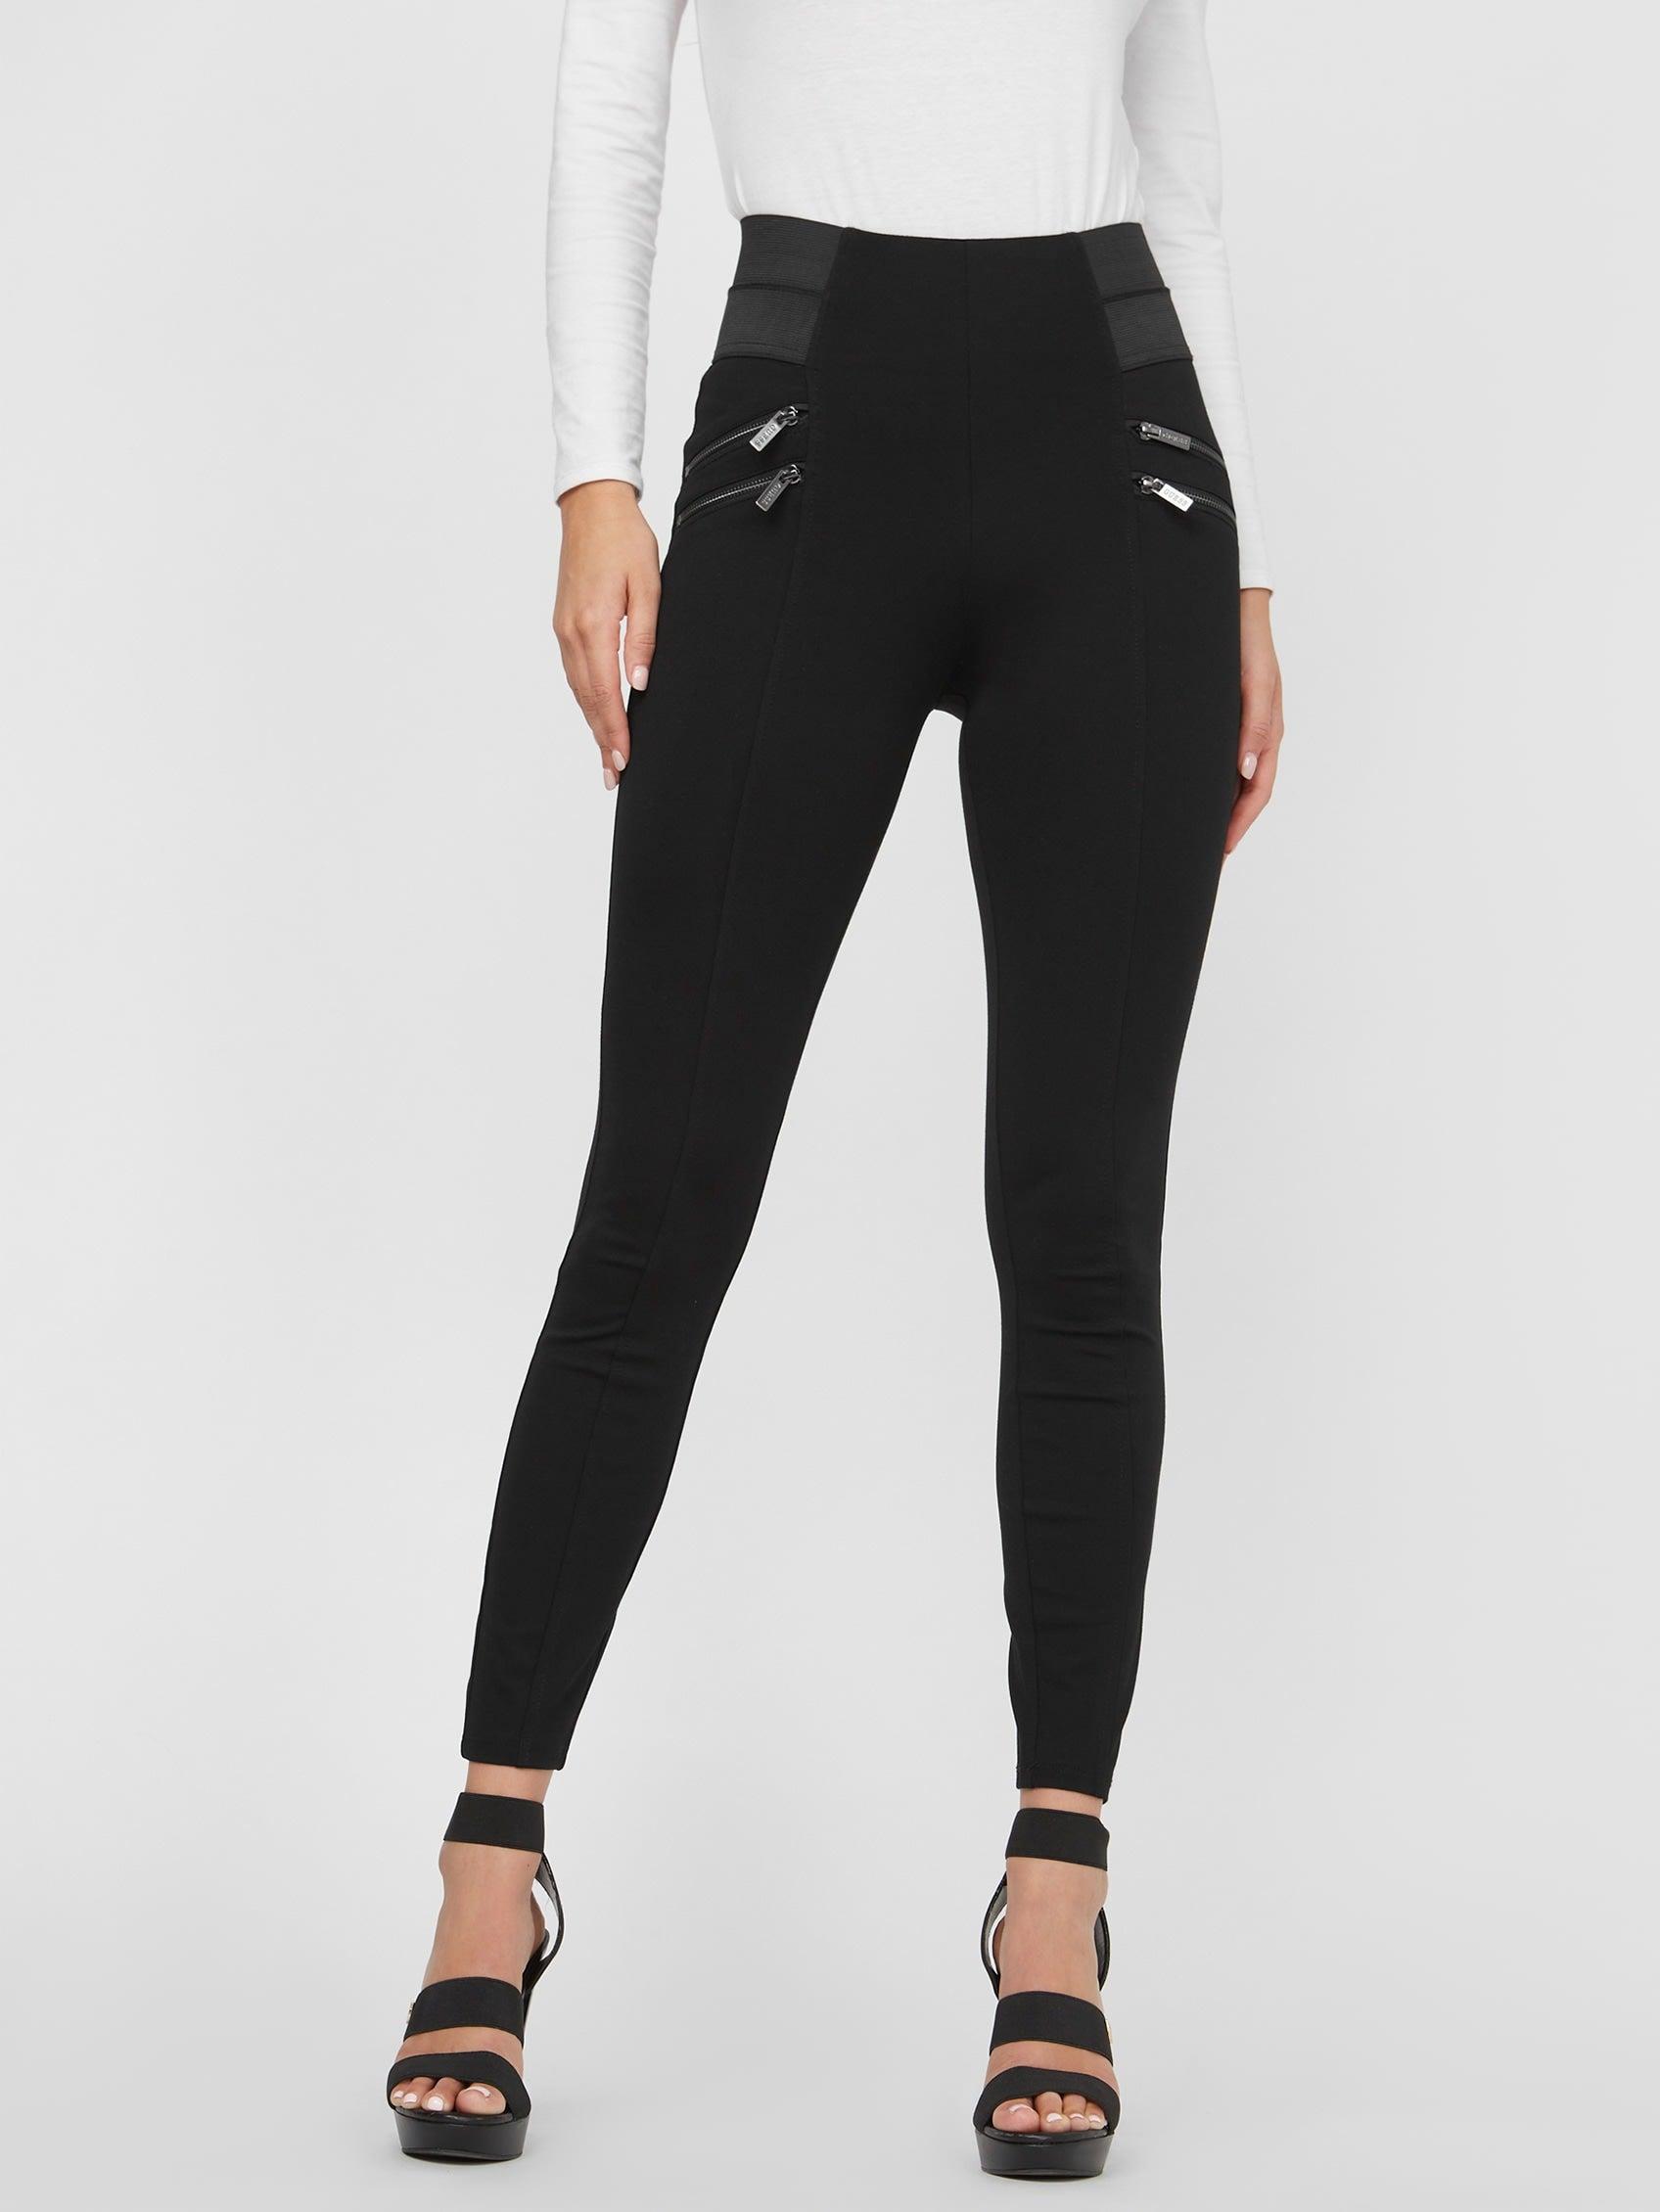 Guess Factory Penny Ponte Pants in Black | Lyst